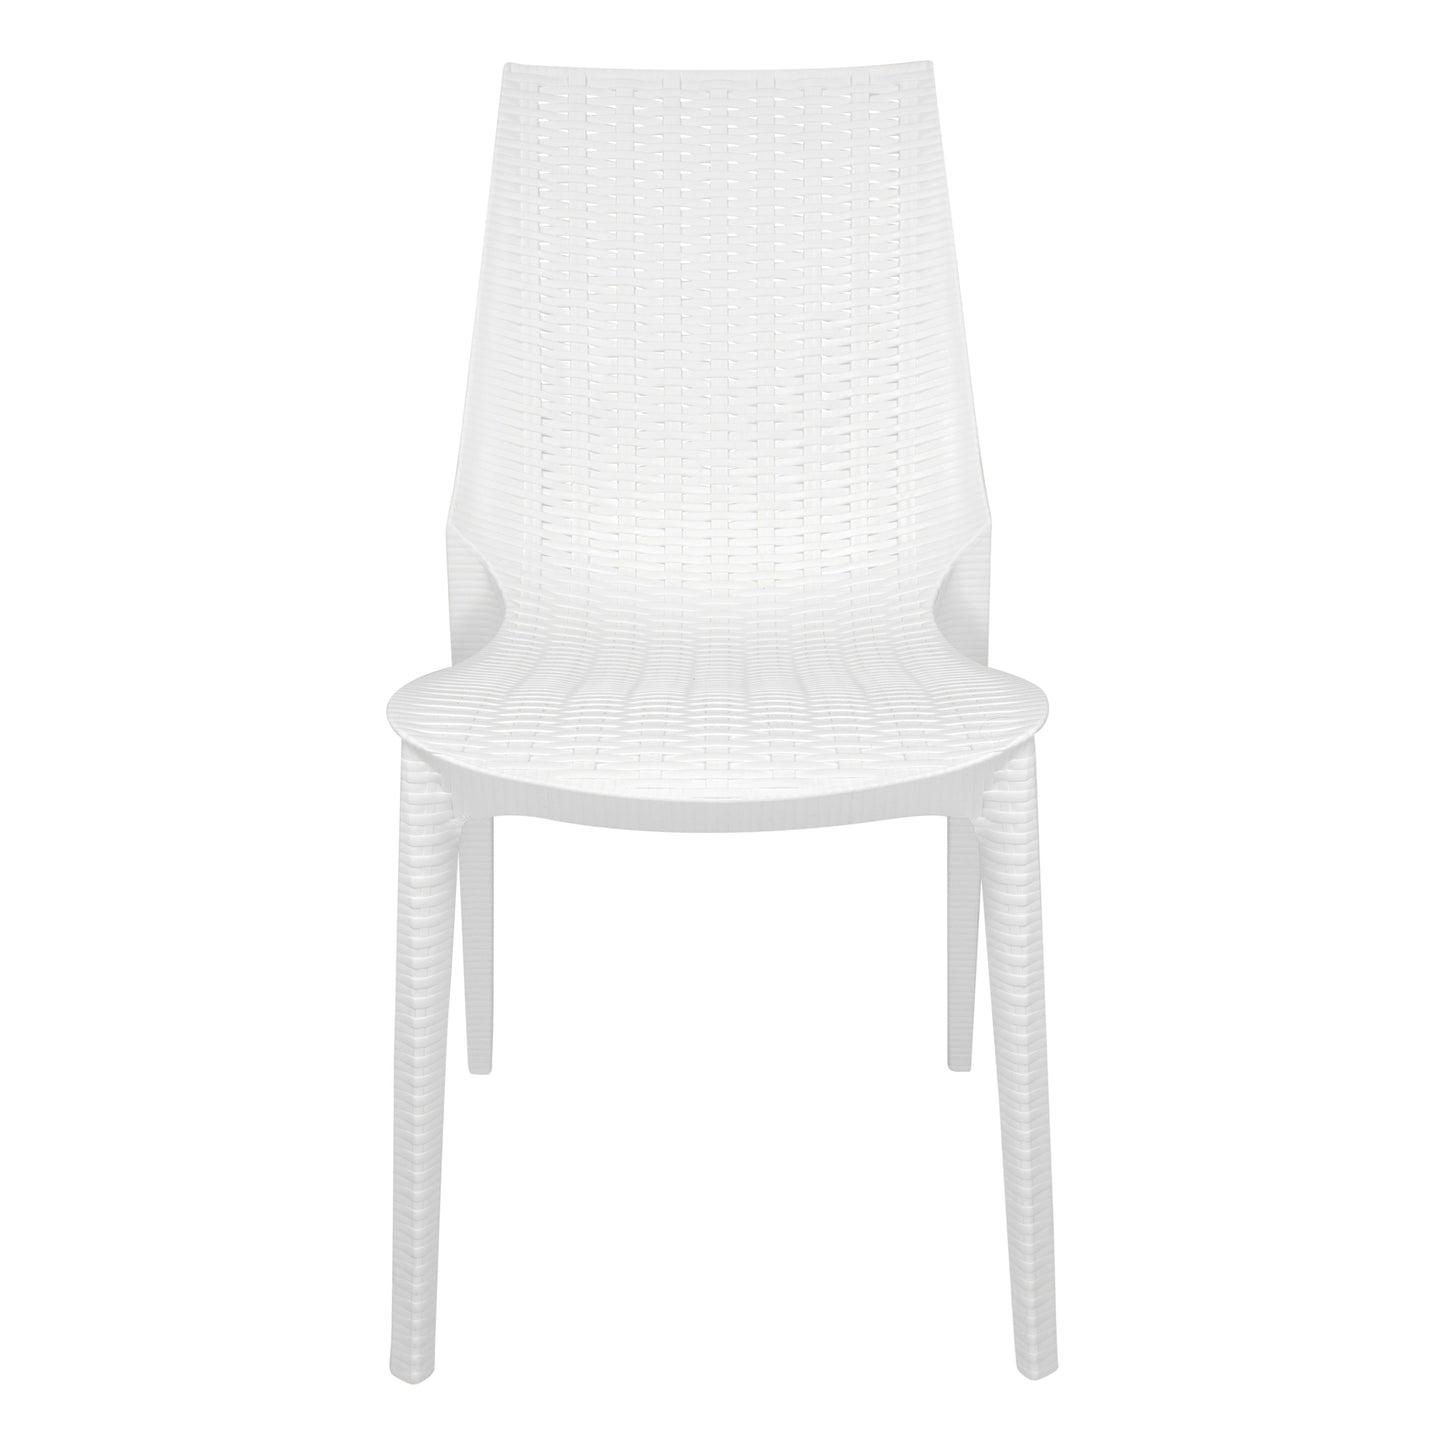 Anders Outdoor Patio Plastic Dining Chair - Set of 4